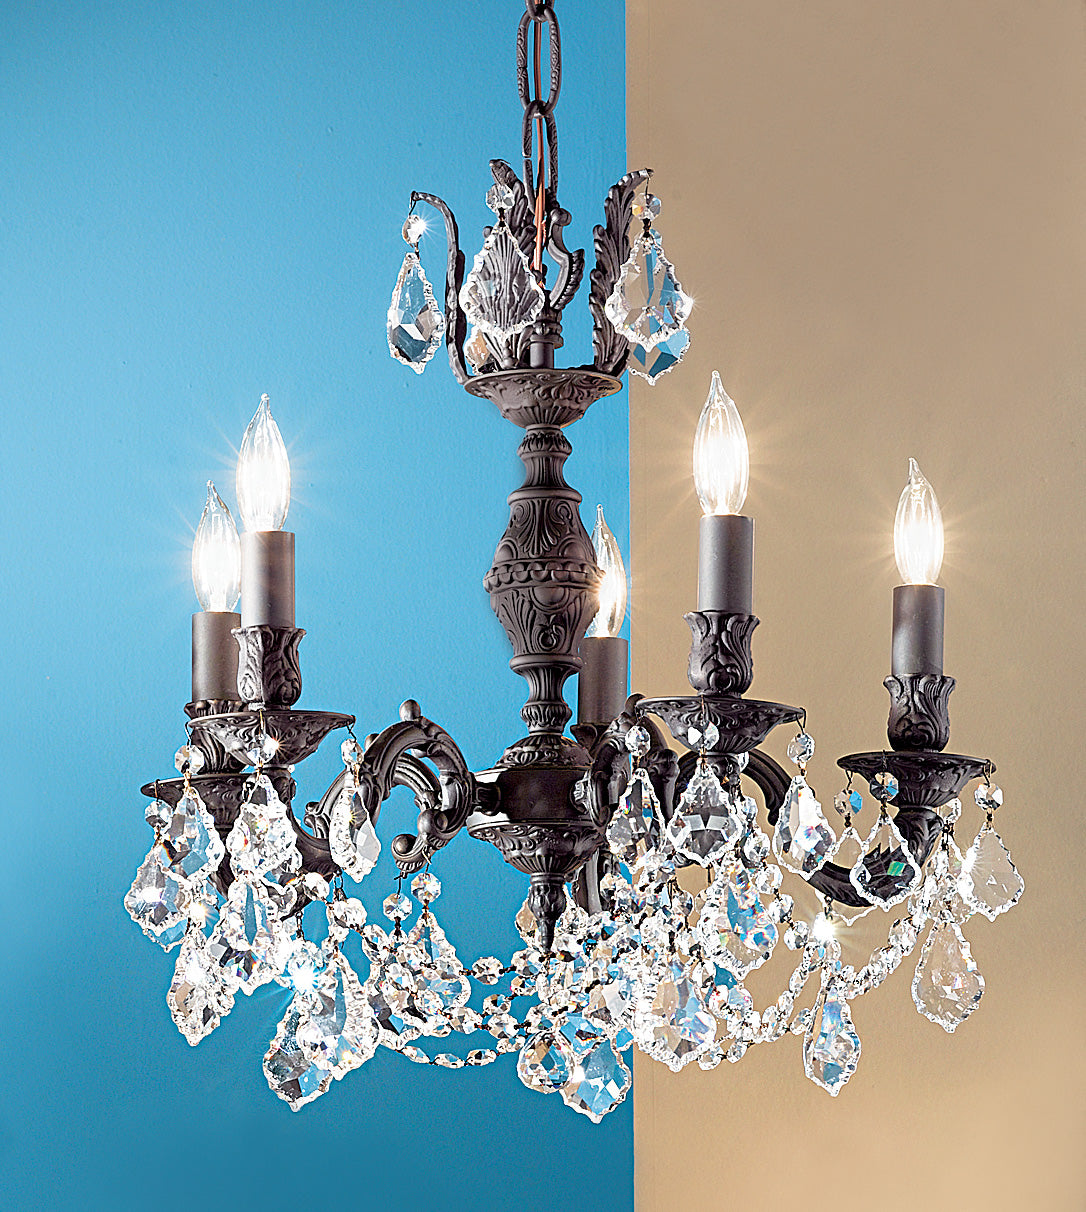 Classic Lighting 57385 AGP CBK Chateau Imperial Crystal Chandelier in Aged Pewter (Imported from Spain)